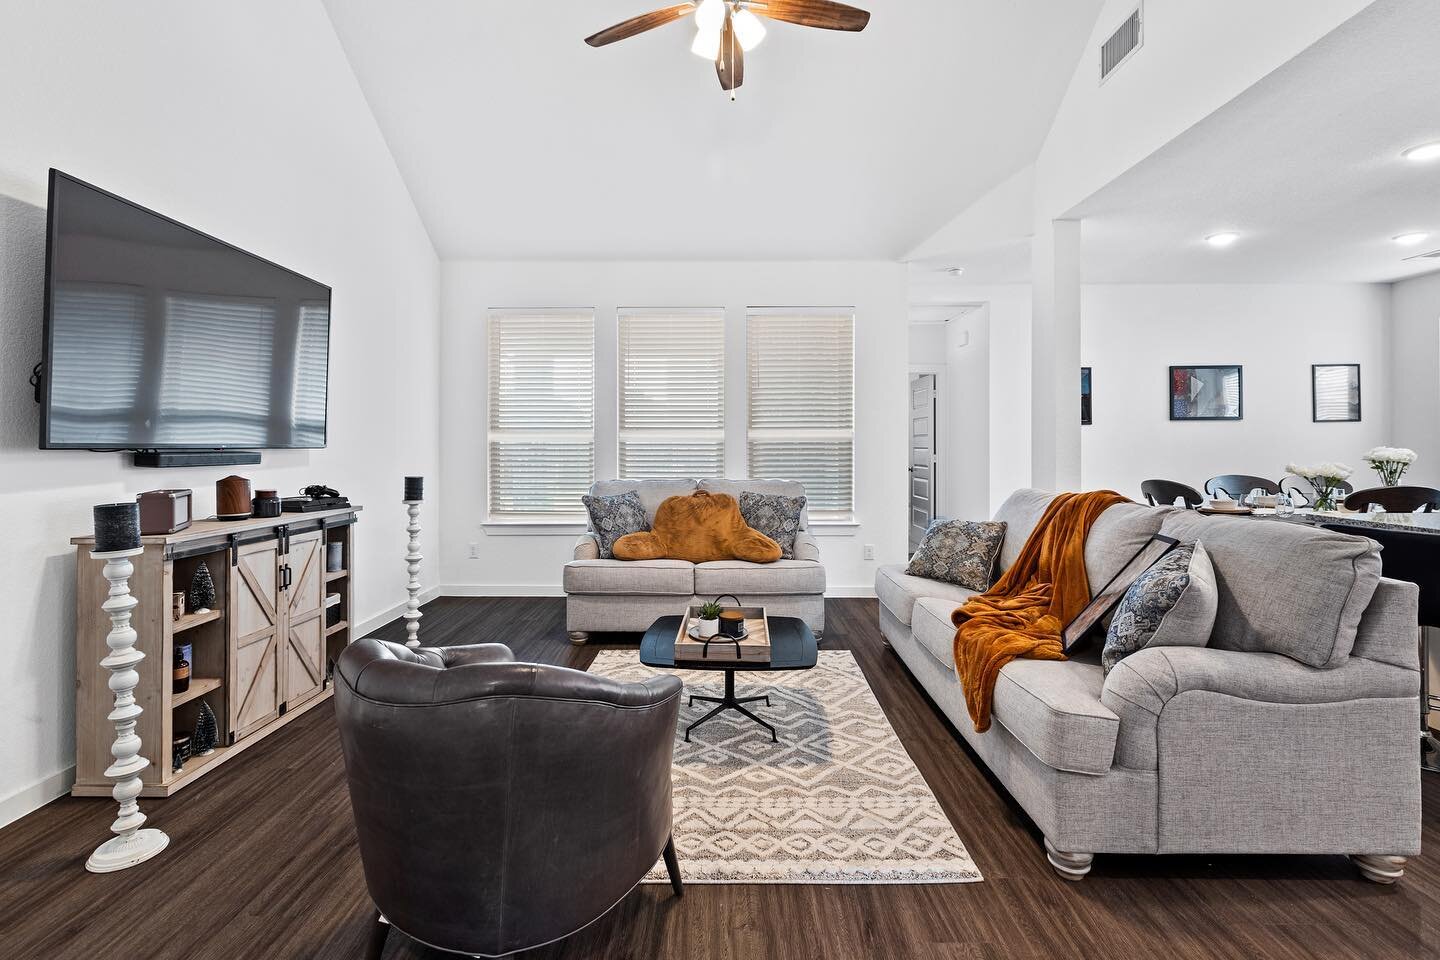 Another home captured for #airbnb and #peerspace this week in #heathtx 📸😀

I love being able to produce quality images for my clients. These will absolutely put 👀 on their listings! More eyes, more cash! 

Going into 2023 you should contact us for